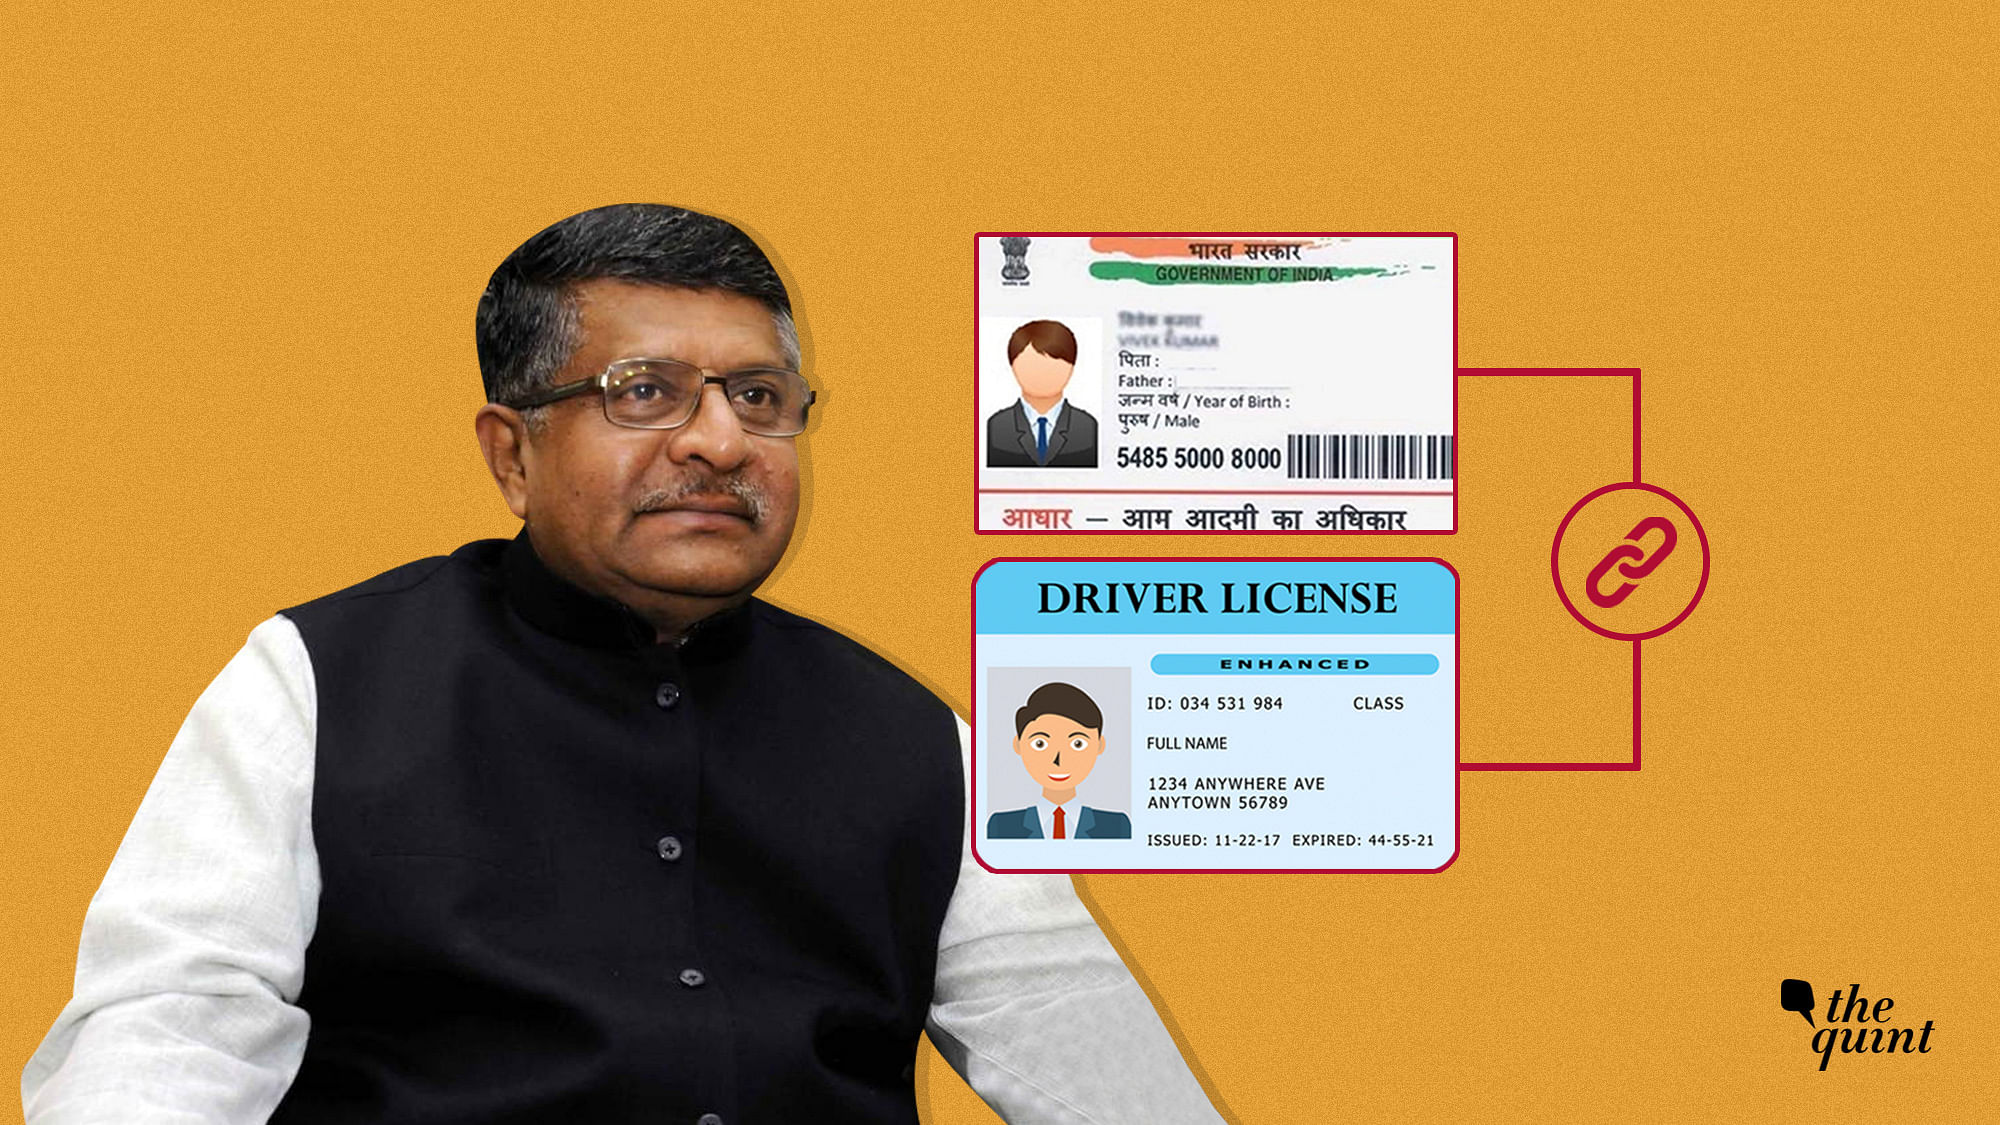 Ravi Shankar Prasad has claimed that the government will make linking driving licences with Aadhar mandatory.